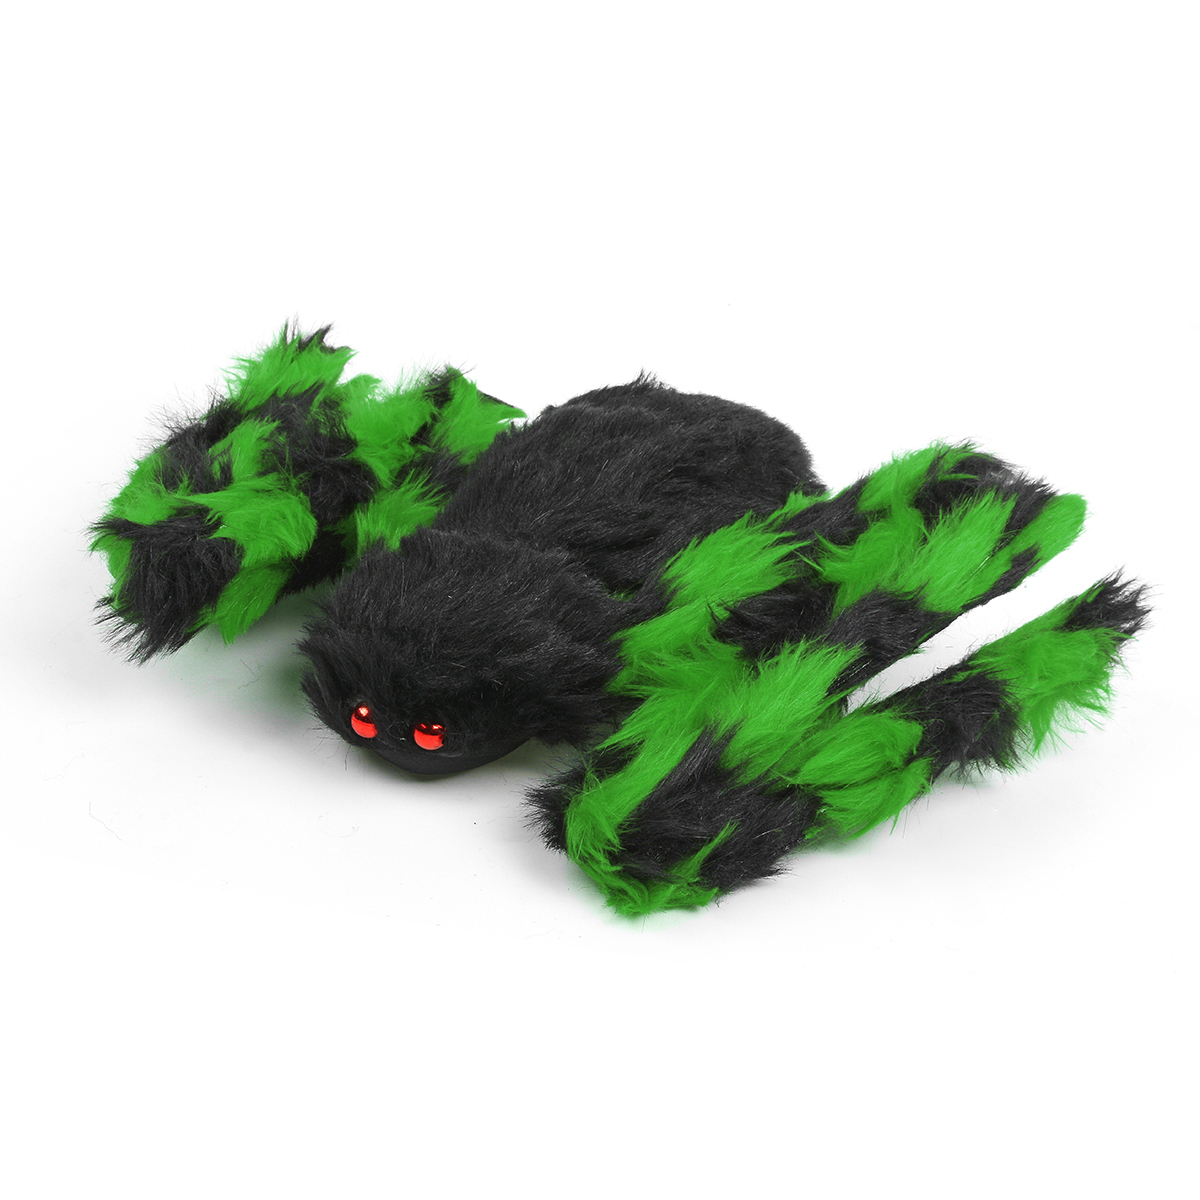 150cm-Horrible-Giant-Furry-Spider-Decorations-Halloween-Haunted-House-Prop-Gift-1589939-6